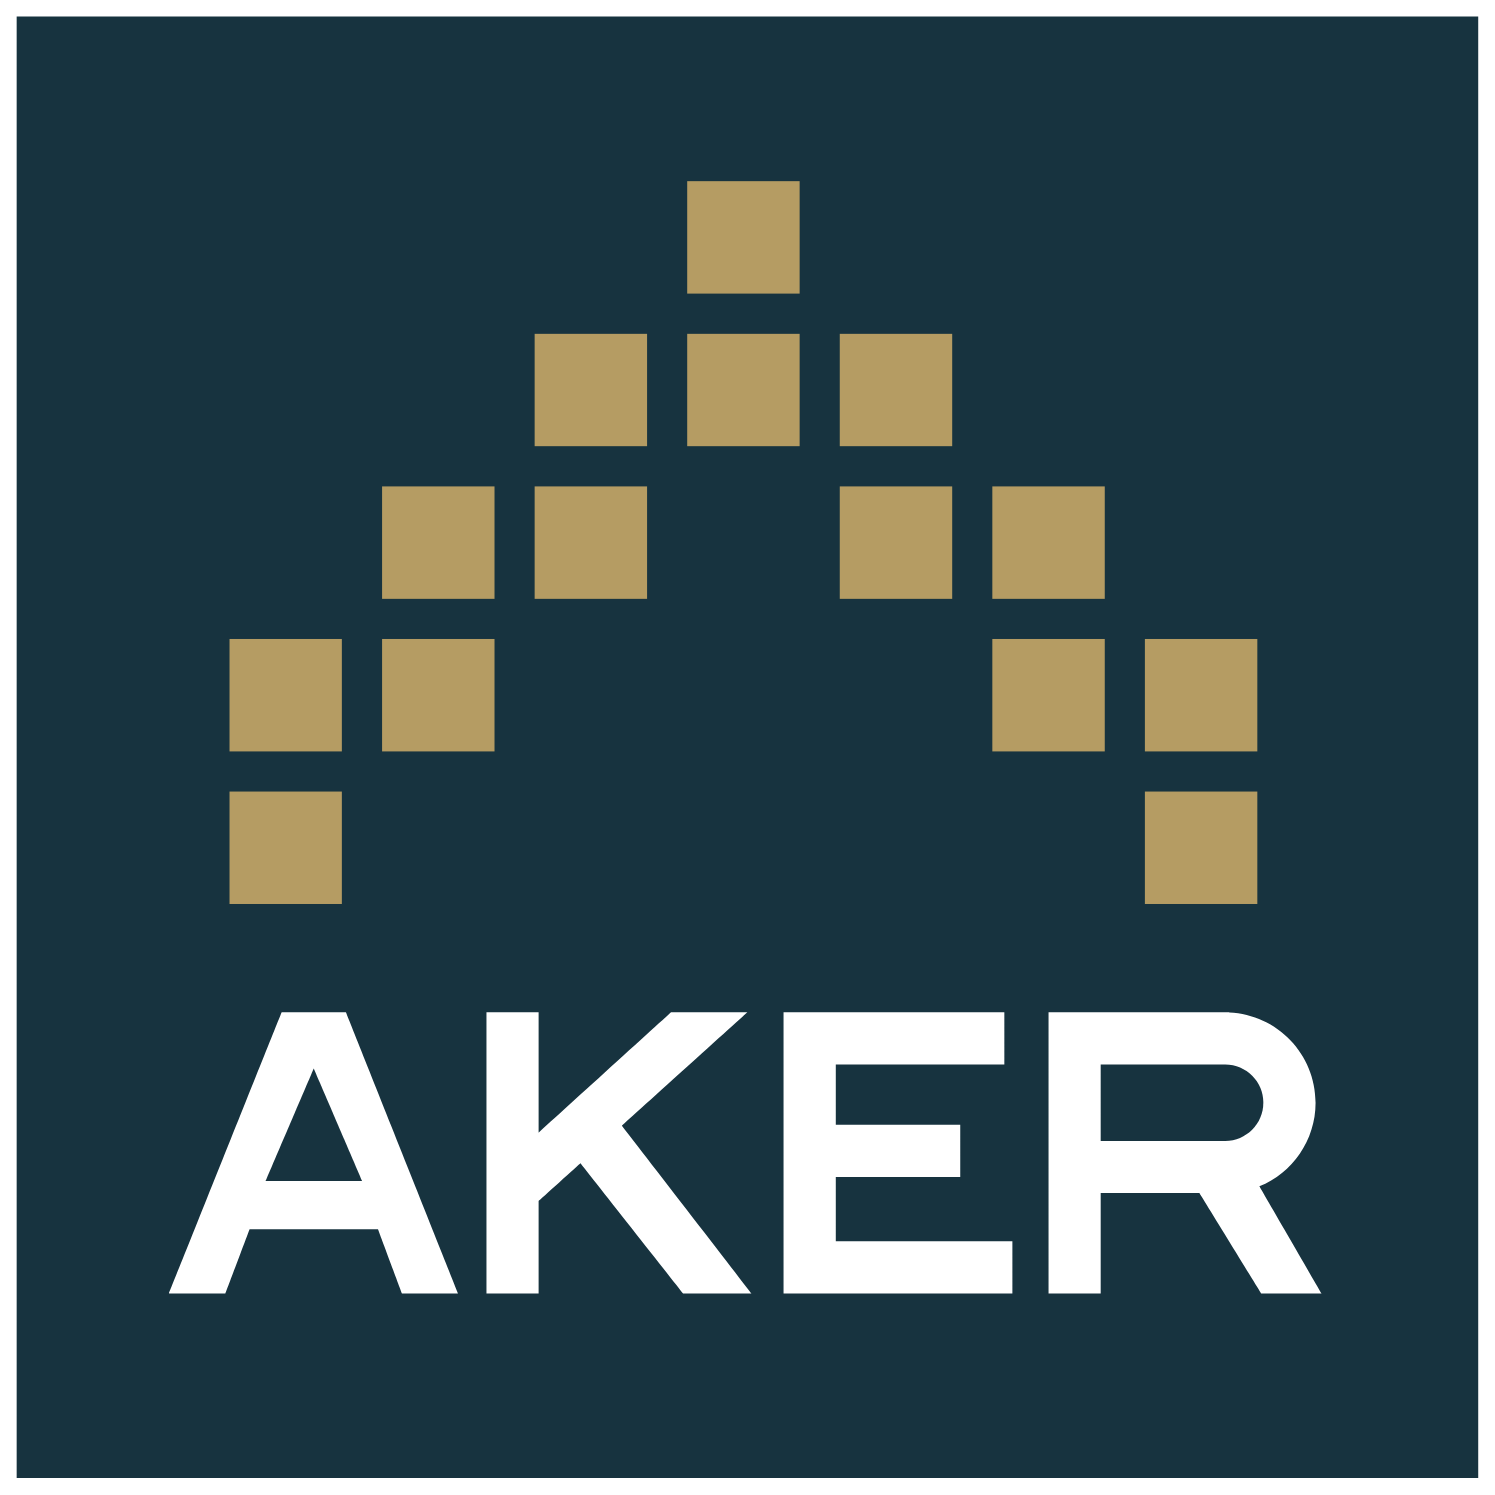 Aker ASA logo in transparent PNG and vectorized SVG formats